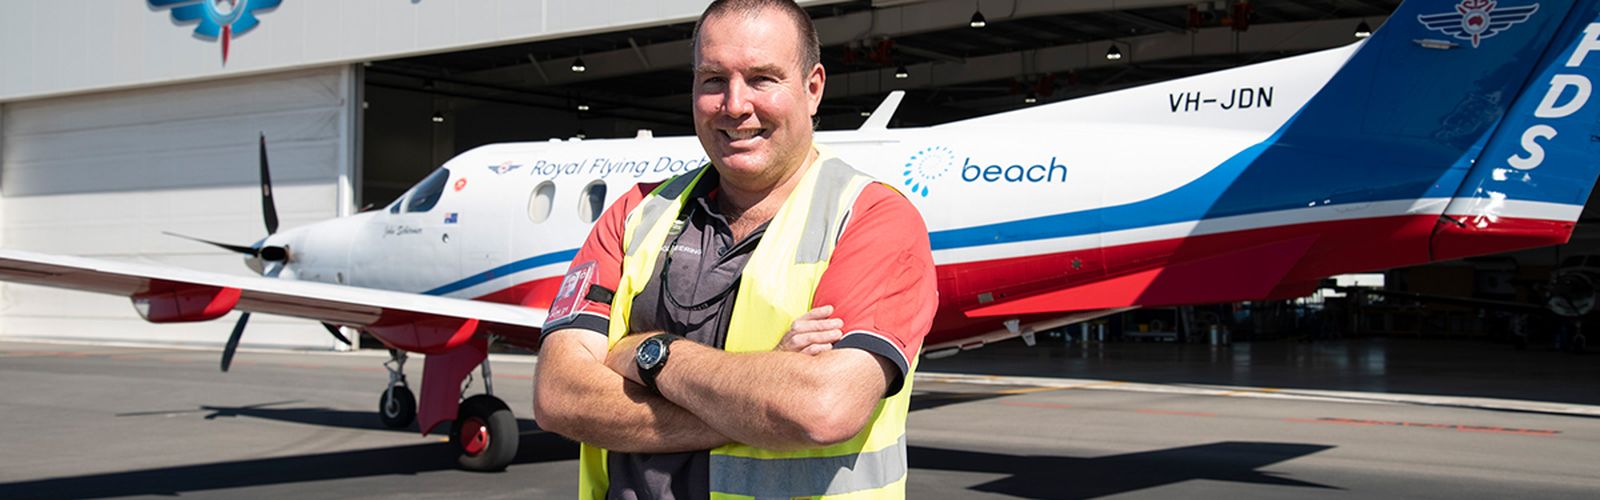 RFDS Trades Assistant Dave Rose